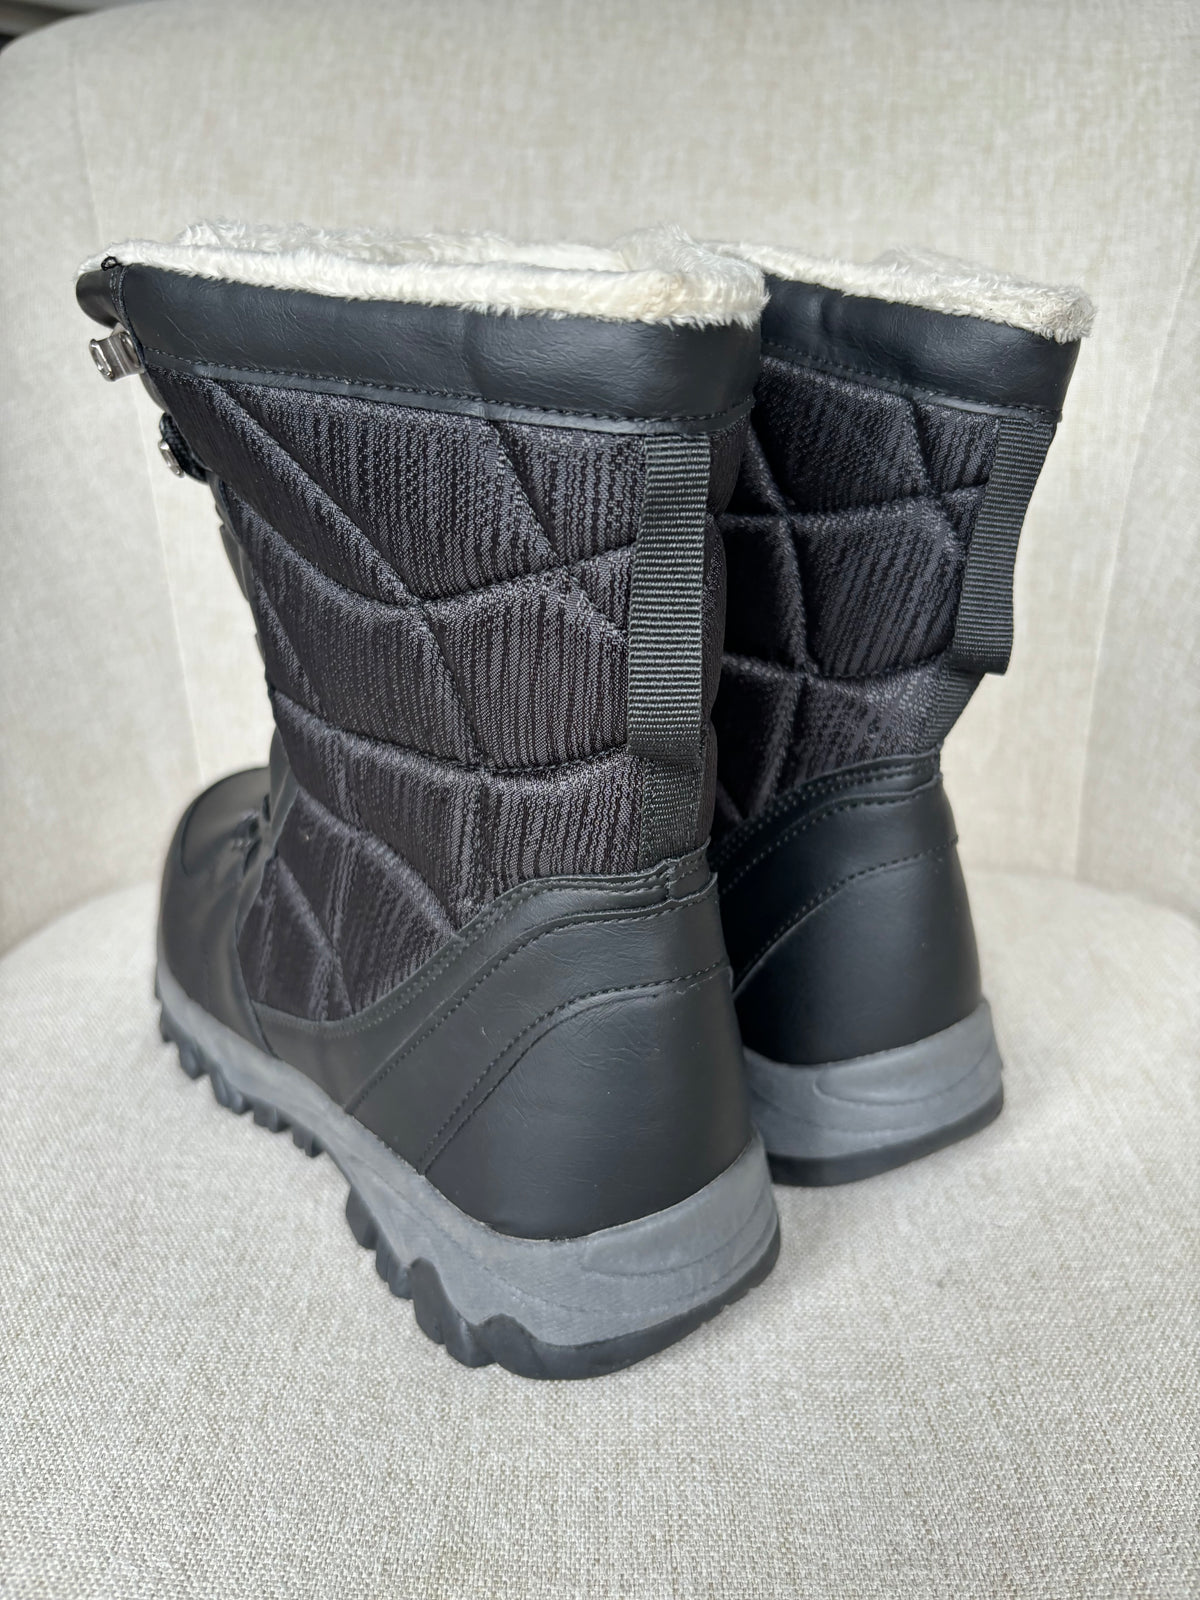 Black Winter Ankle Boots by Freemans Size 6.5 UK